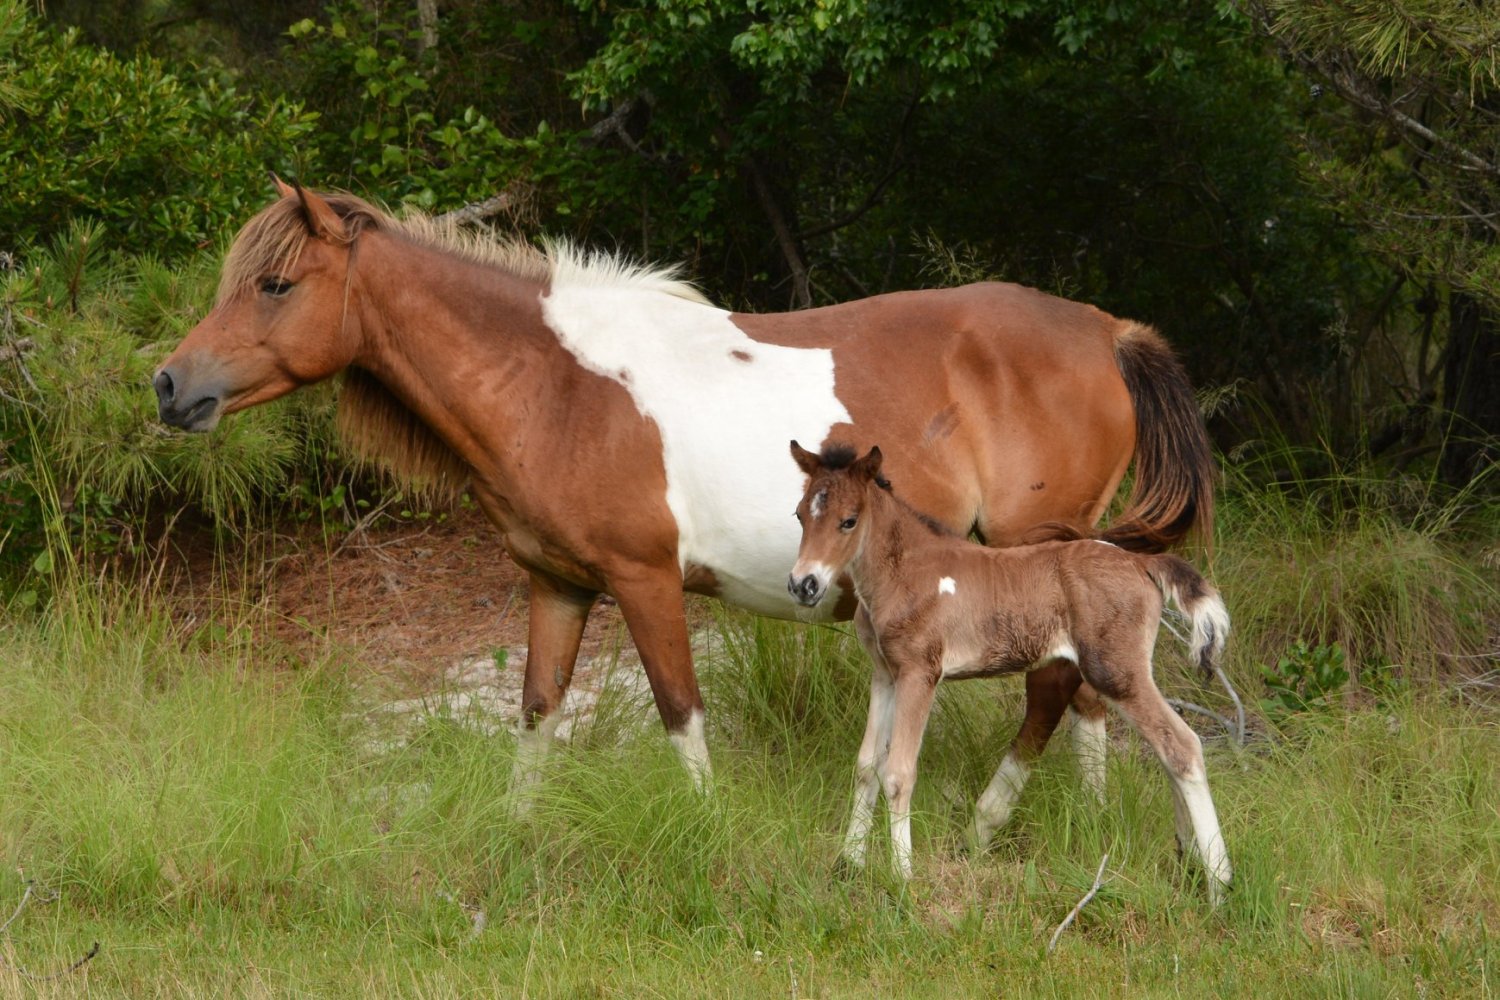 New Foal Born On Assateague Island, Officials Warn Visitors To Stay At A Distance – CBS Baltimore